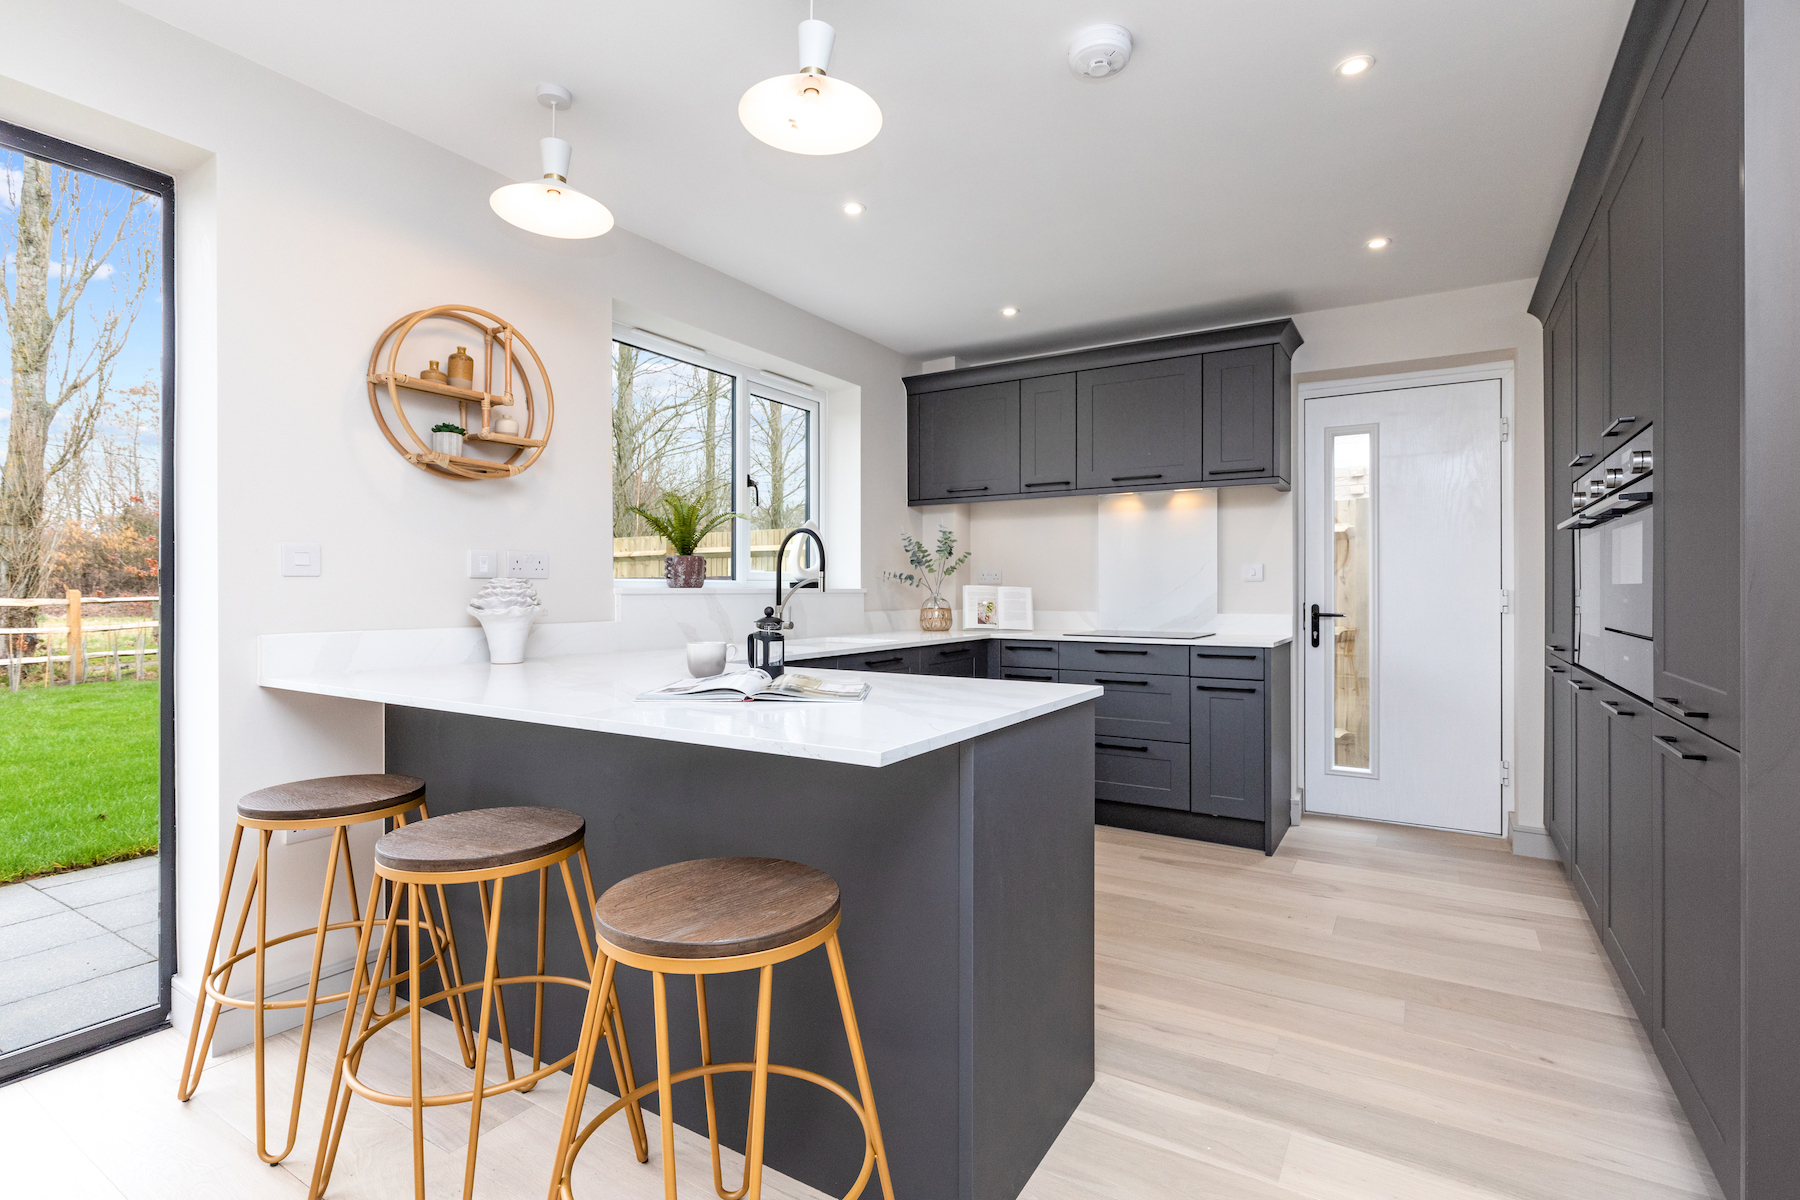 Suburban Development in Mid Sussex Countryside Kitchen and Dining with breakfast bar and bar stools